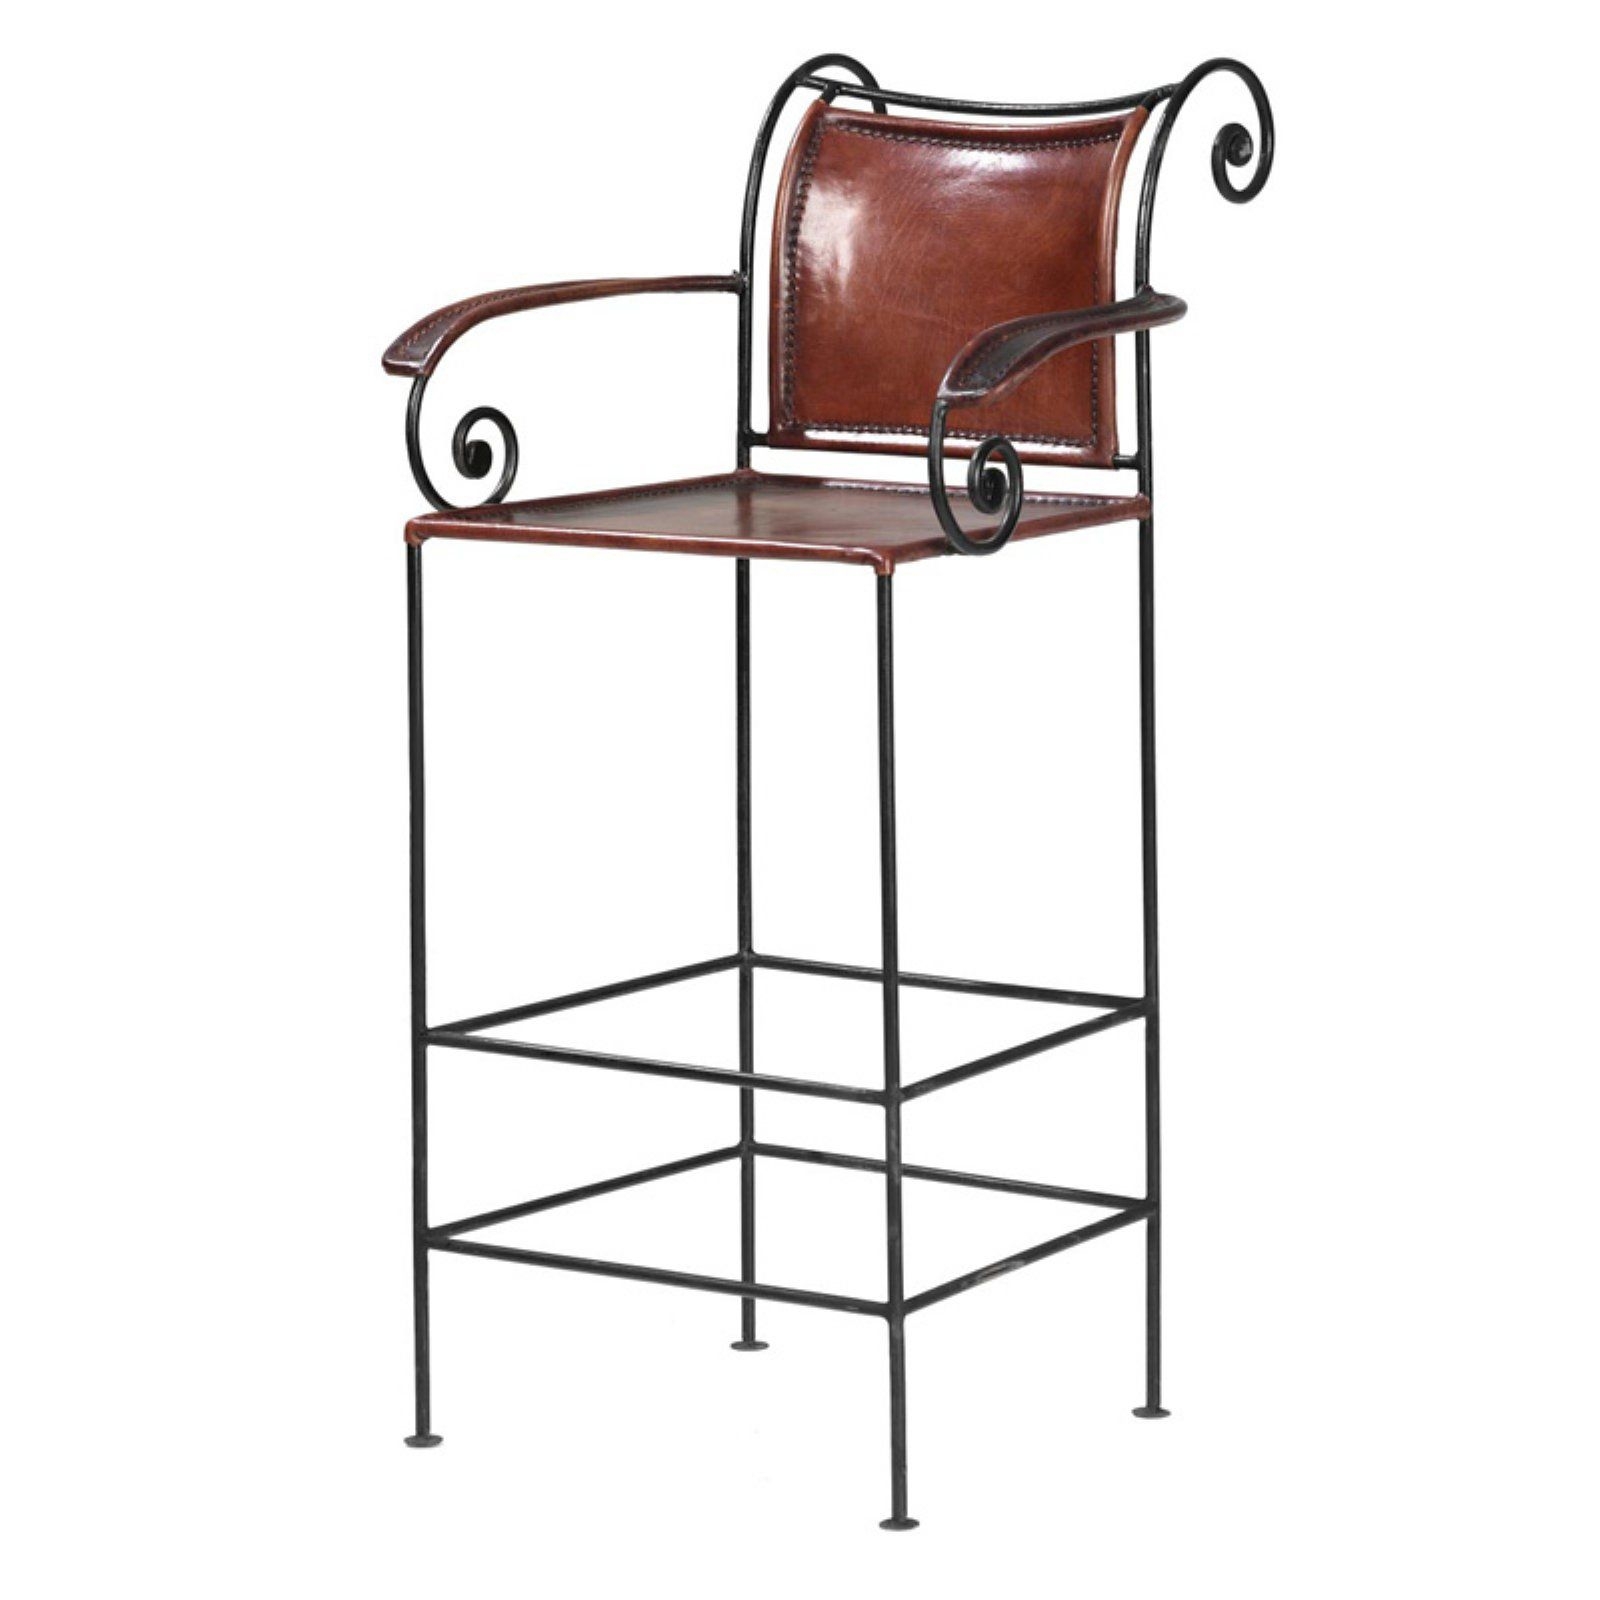 Wrought iron stools counter height